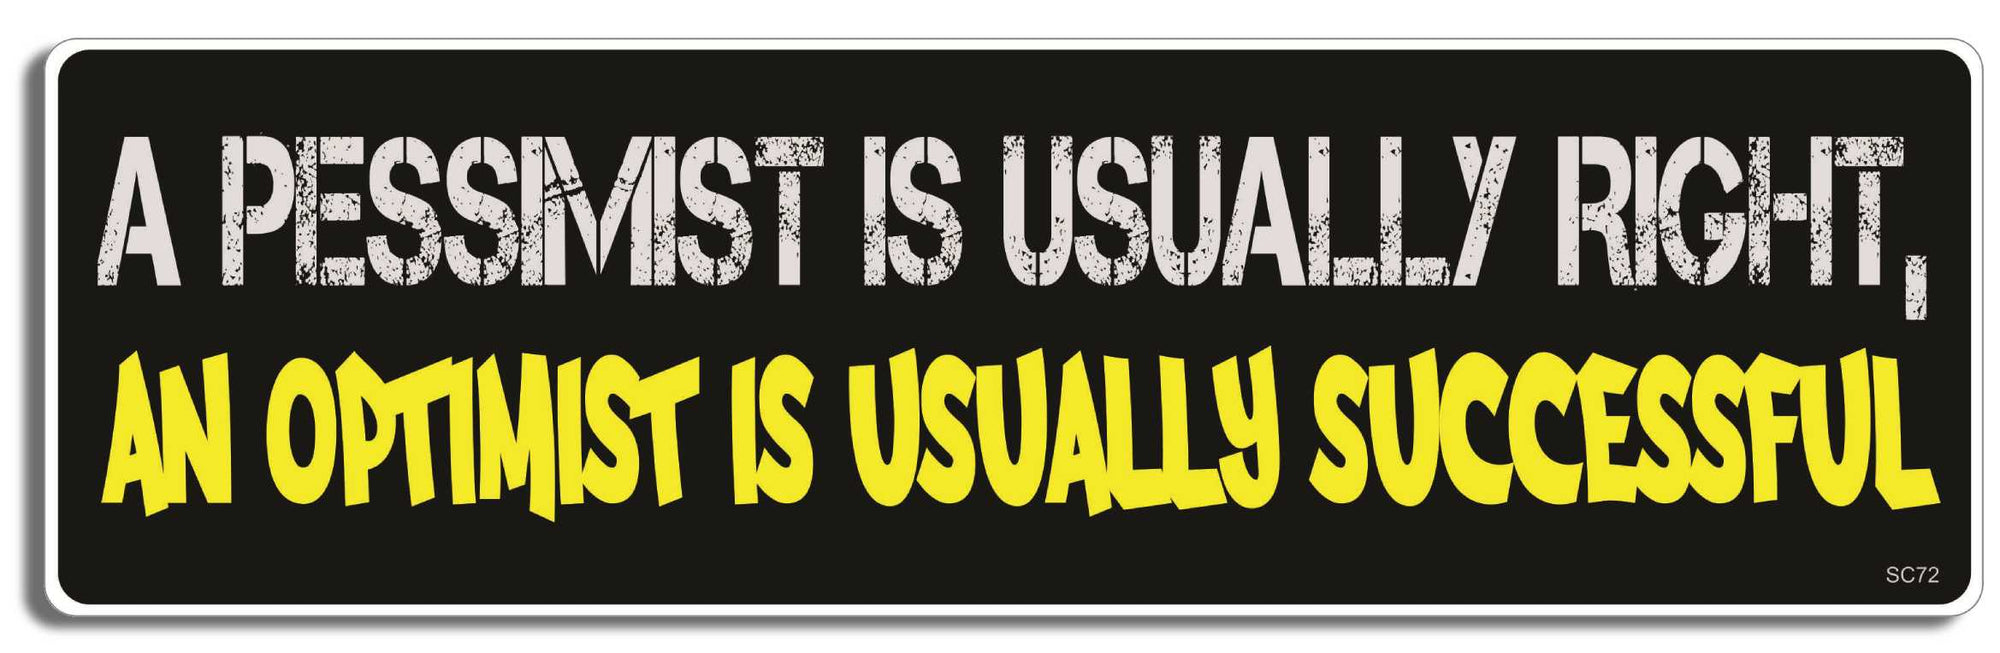 A pessimist is usually right, an optimist is usually successful - 3" x 10" Bumper Sticker--Car Magnet- -  Decal Bumper Sticker-political Bumper Sticker Car Magnet A pessimist is usually right, an-  Decal for carsclever